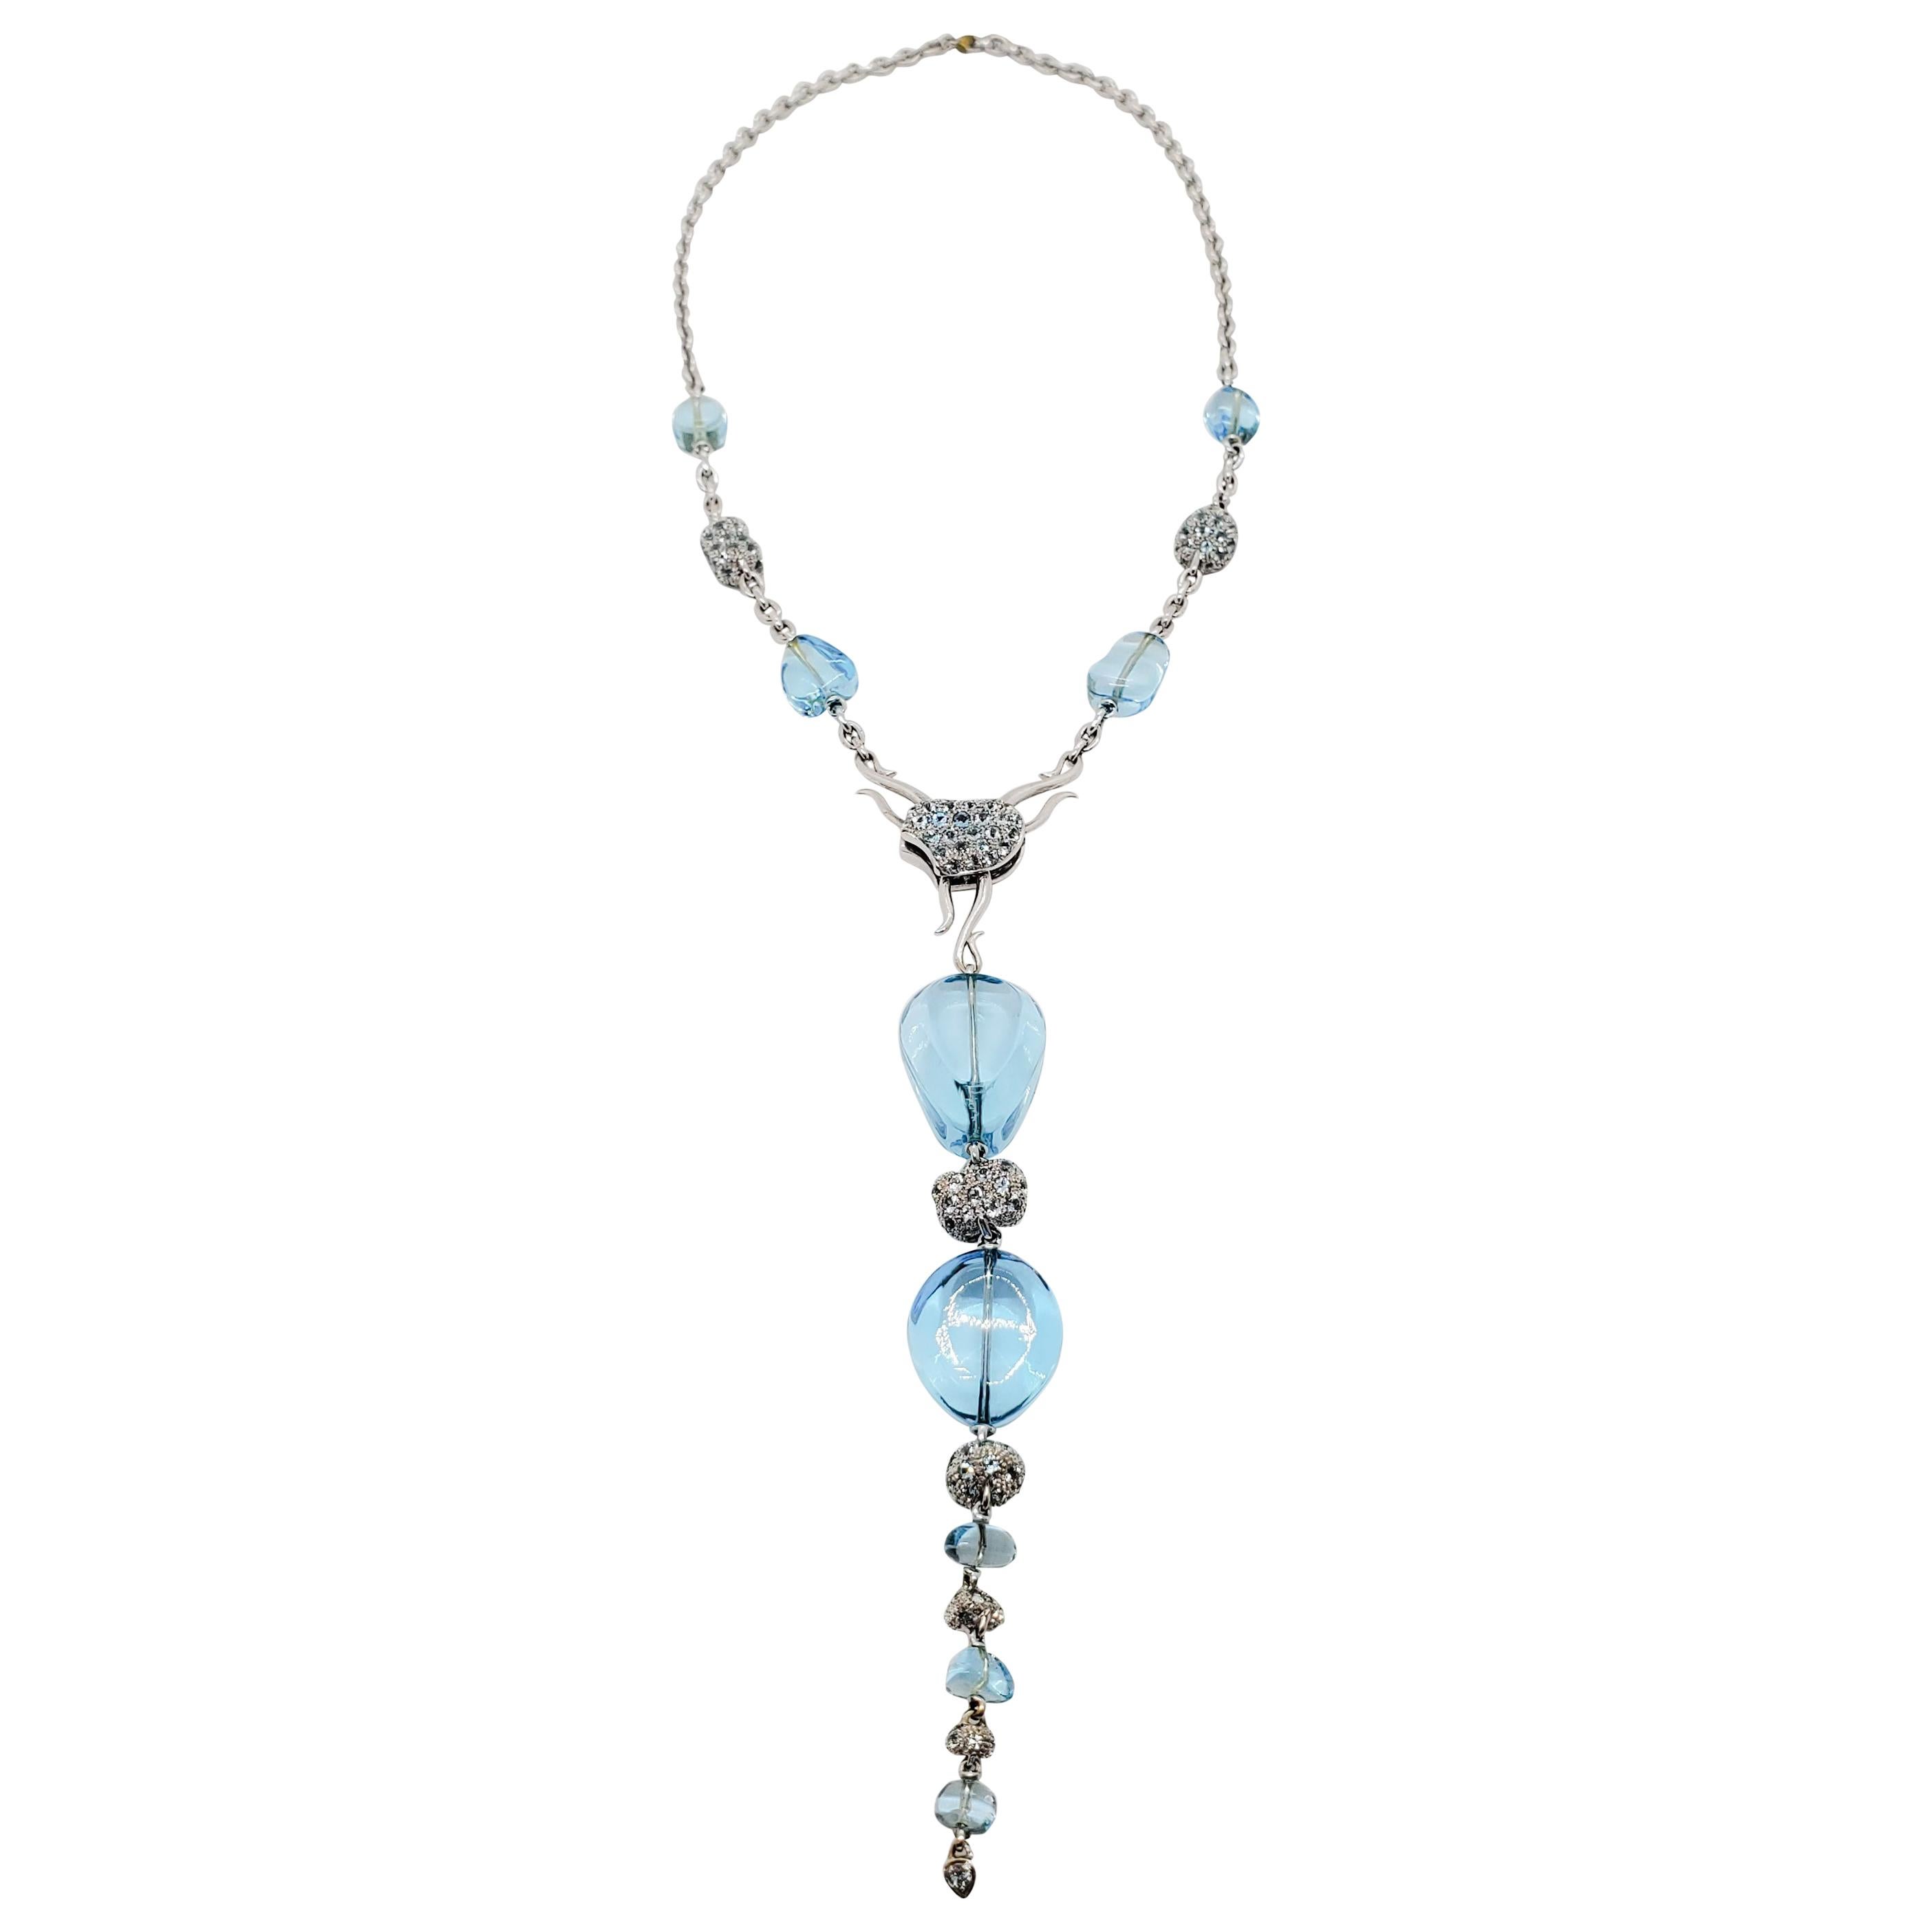 819 Carat Blue Topaz Tumbles Necklace For Sale at 1stDibs